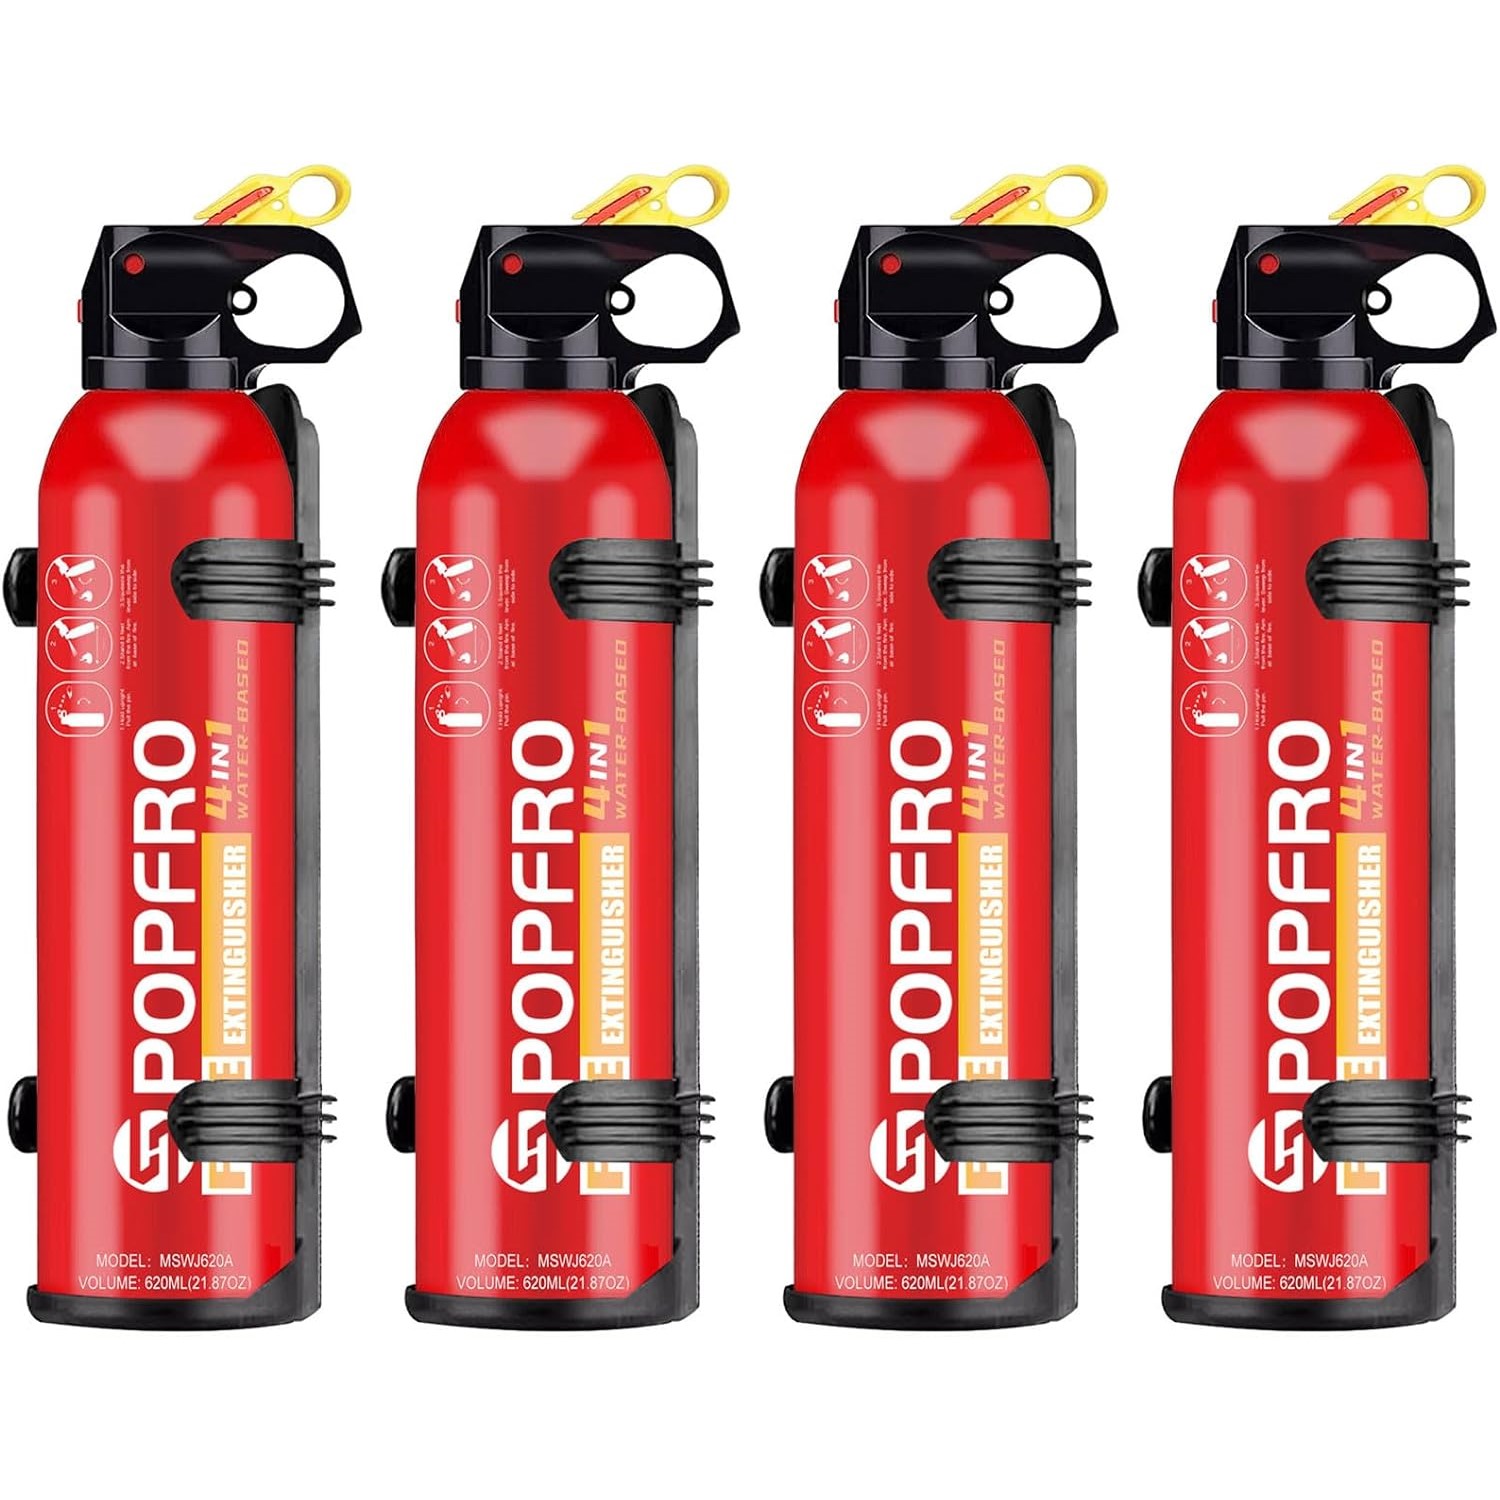 

1pc/2pcs/4pcs Portable Fire Extinguisher 4-in-1 Small Fire Extinguisher For Home, Garage, Kitchen, Car For Electric, Textile And Grease Fires Easy Clean Wall Mount Include